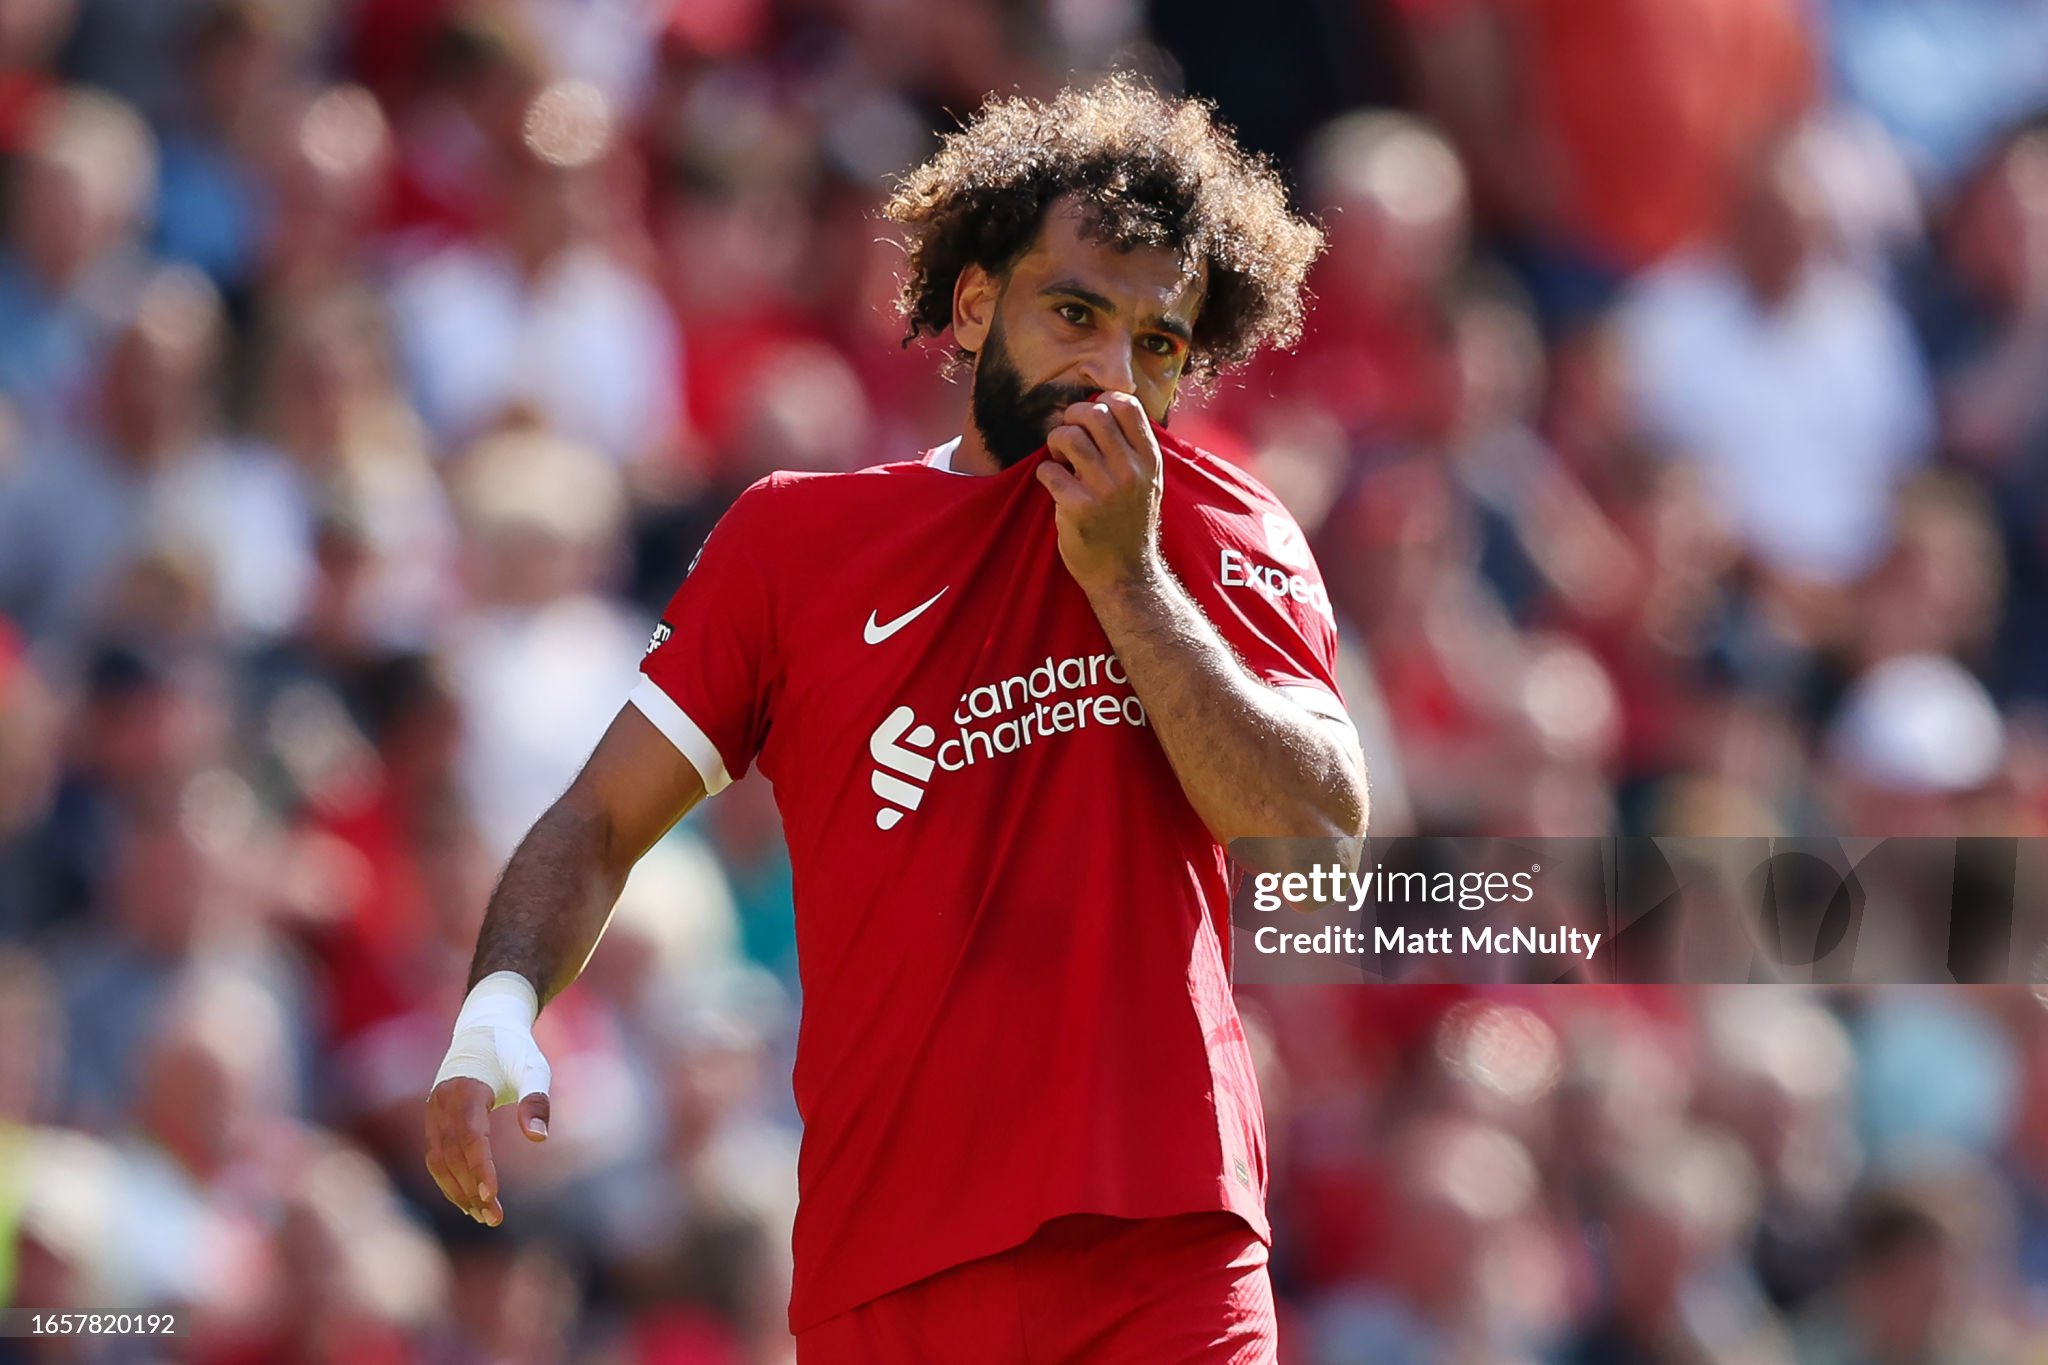 Liverpool forward Mo Salah expected to stay at club for now